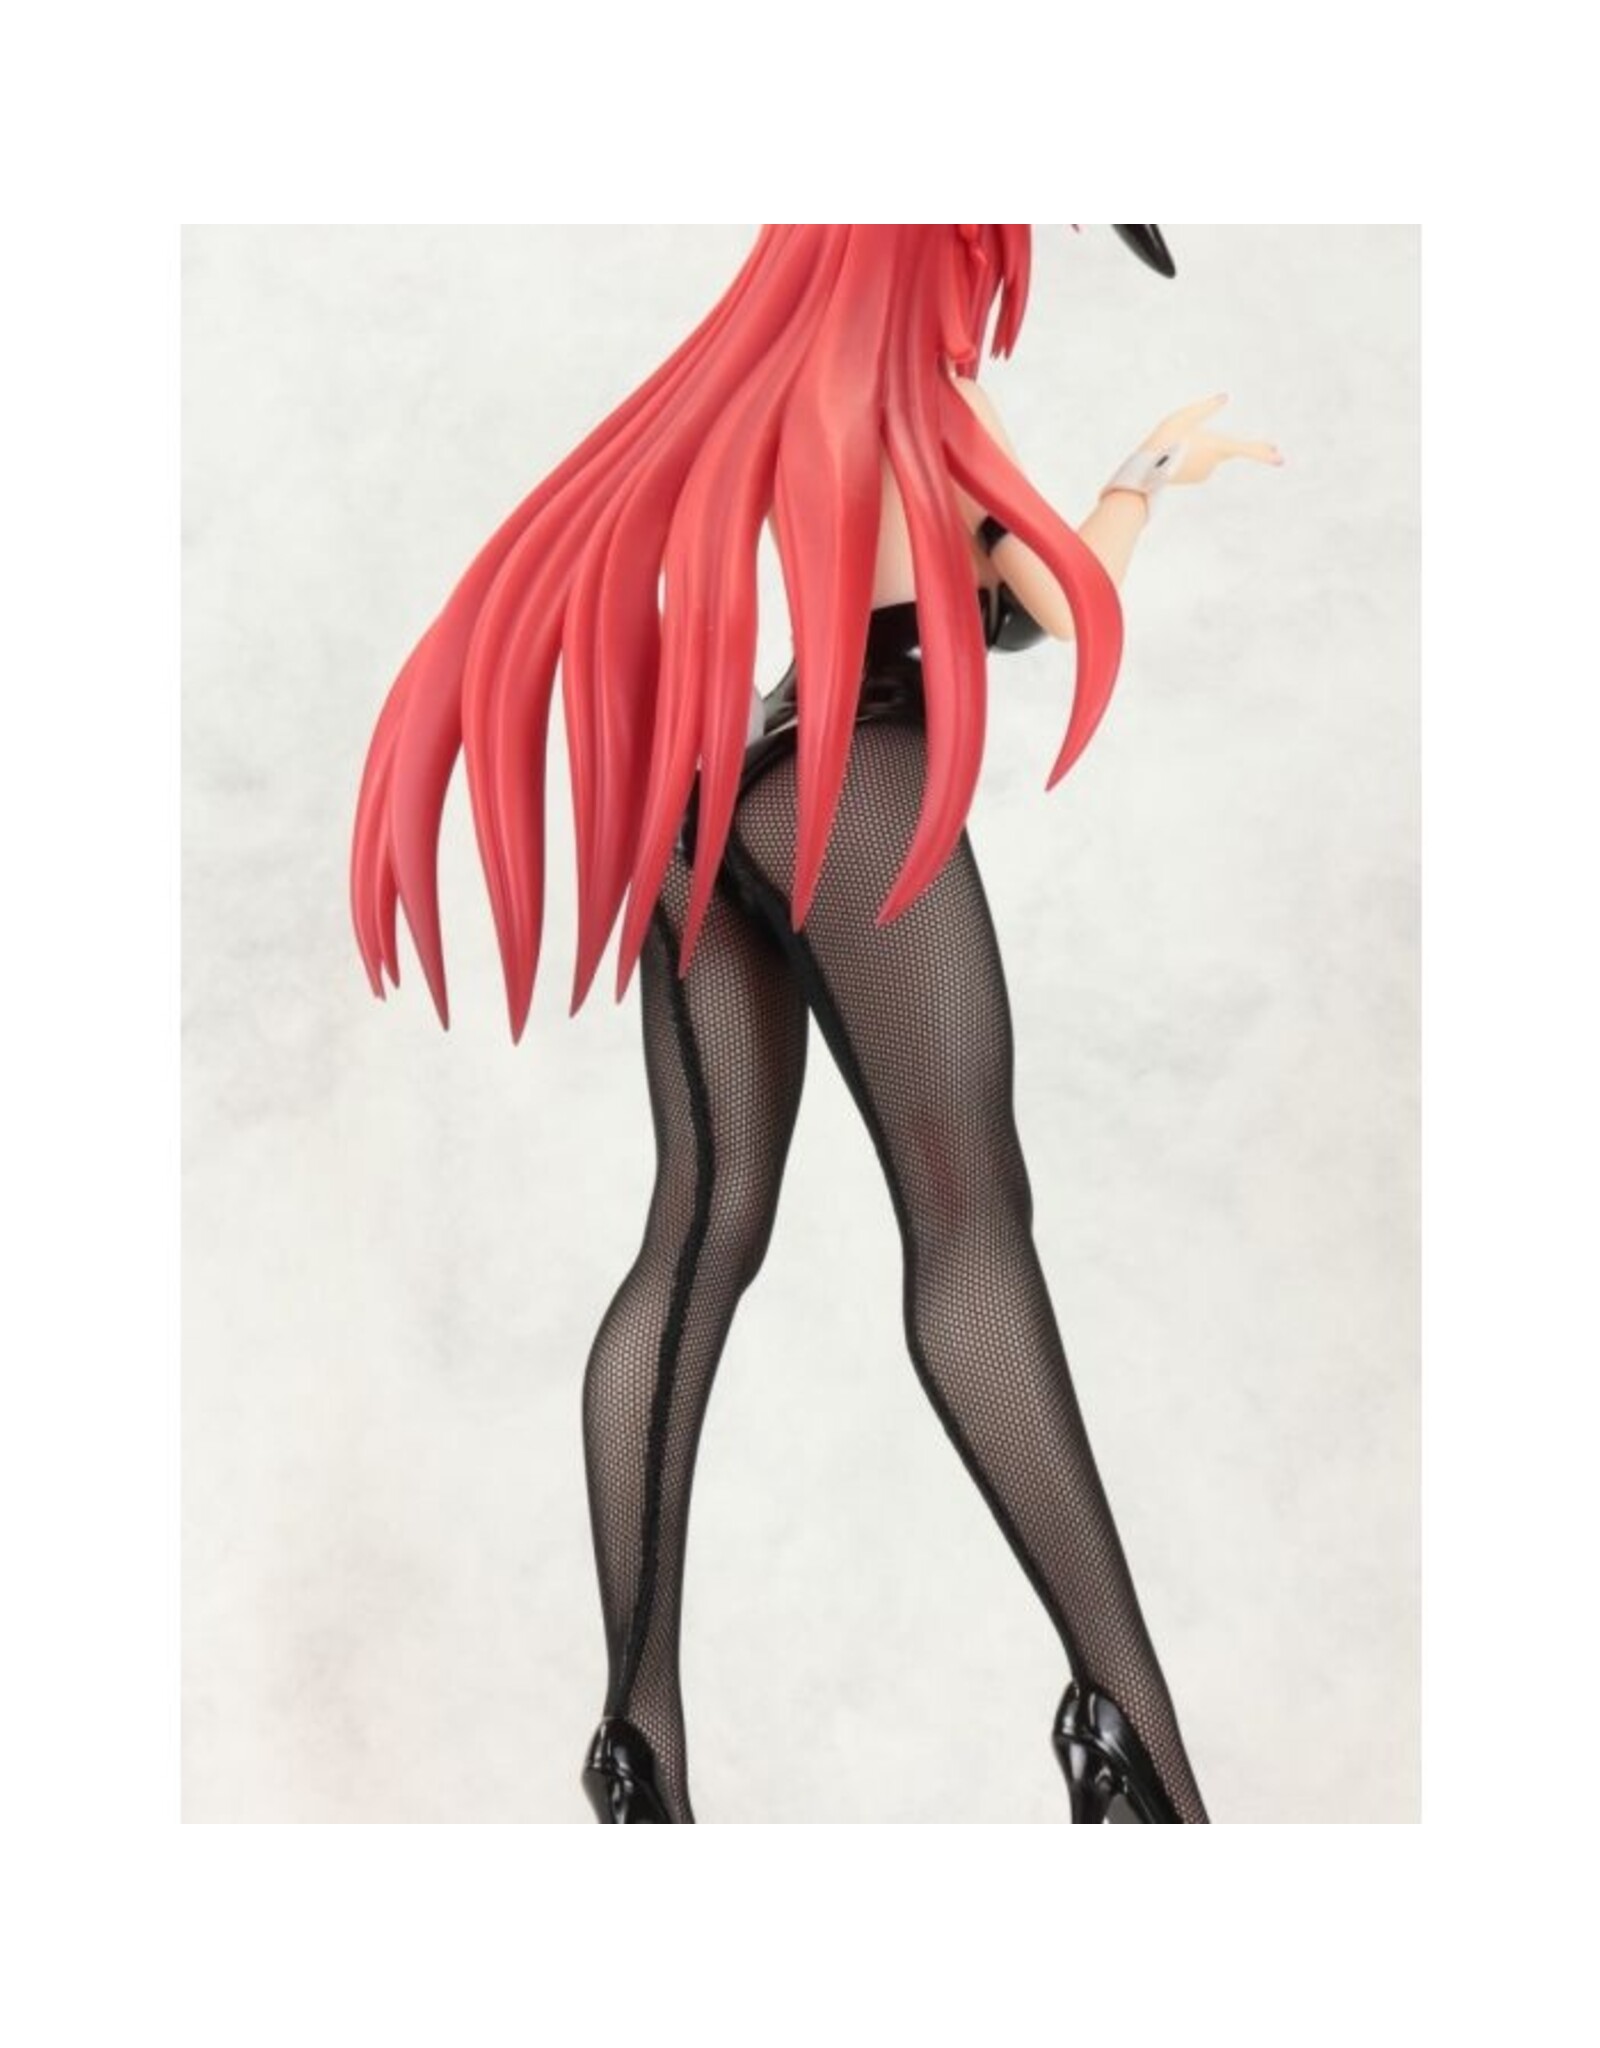 Rias Gremory Bunny Ver. 1/6 Scale Figure *Pre-order* *DEPOSIT ONLY*